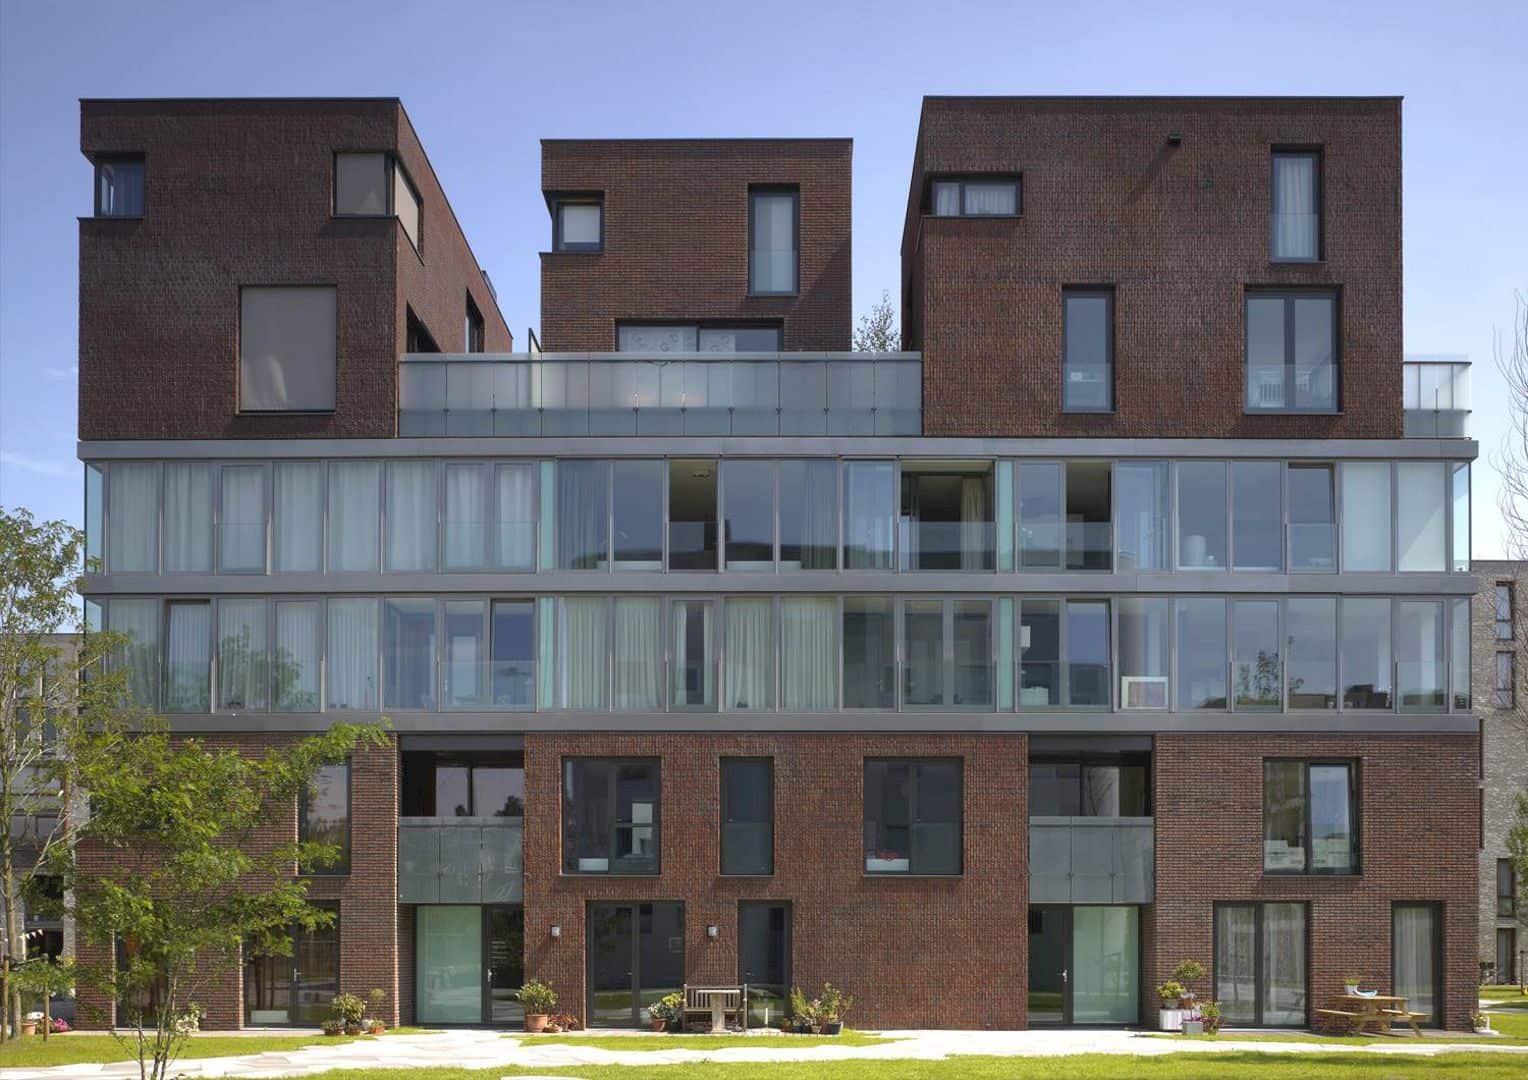 Urban Villa Myriad A Residential Building That Stands Out In Funenpark Amsterdam 5